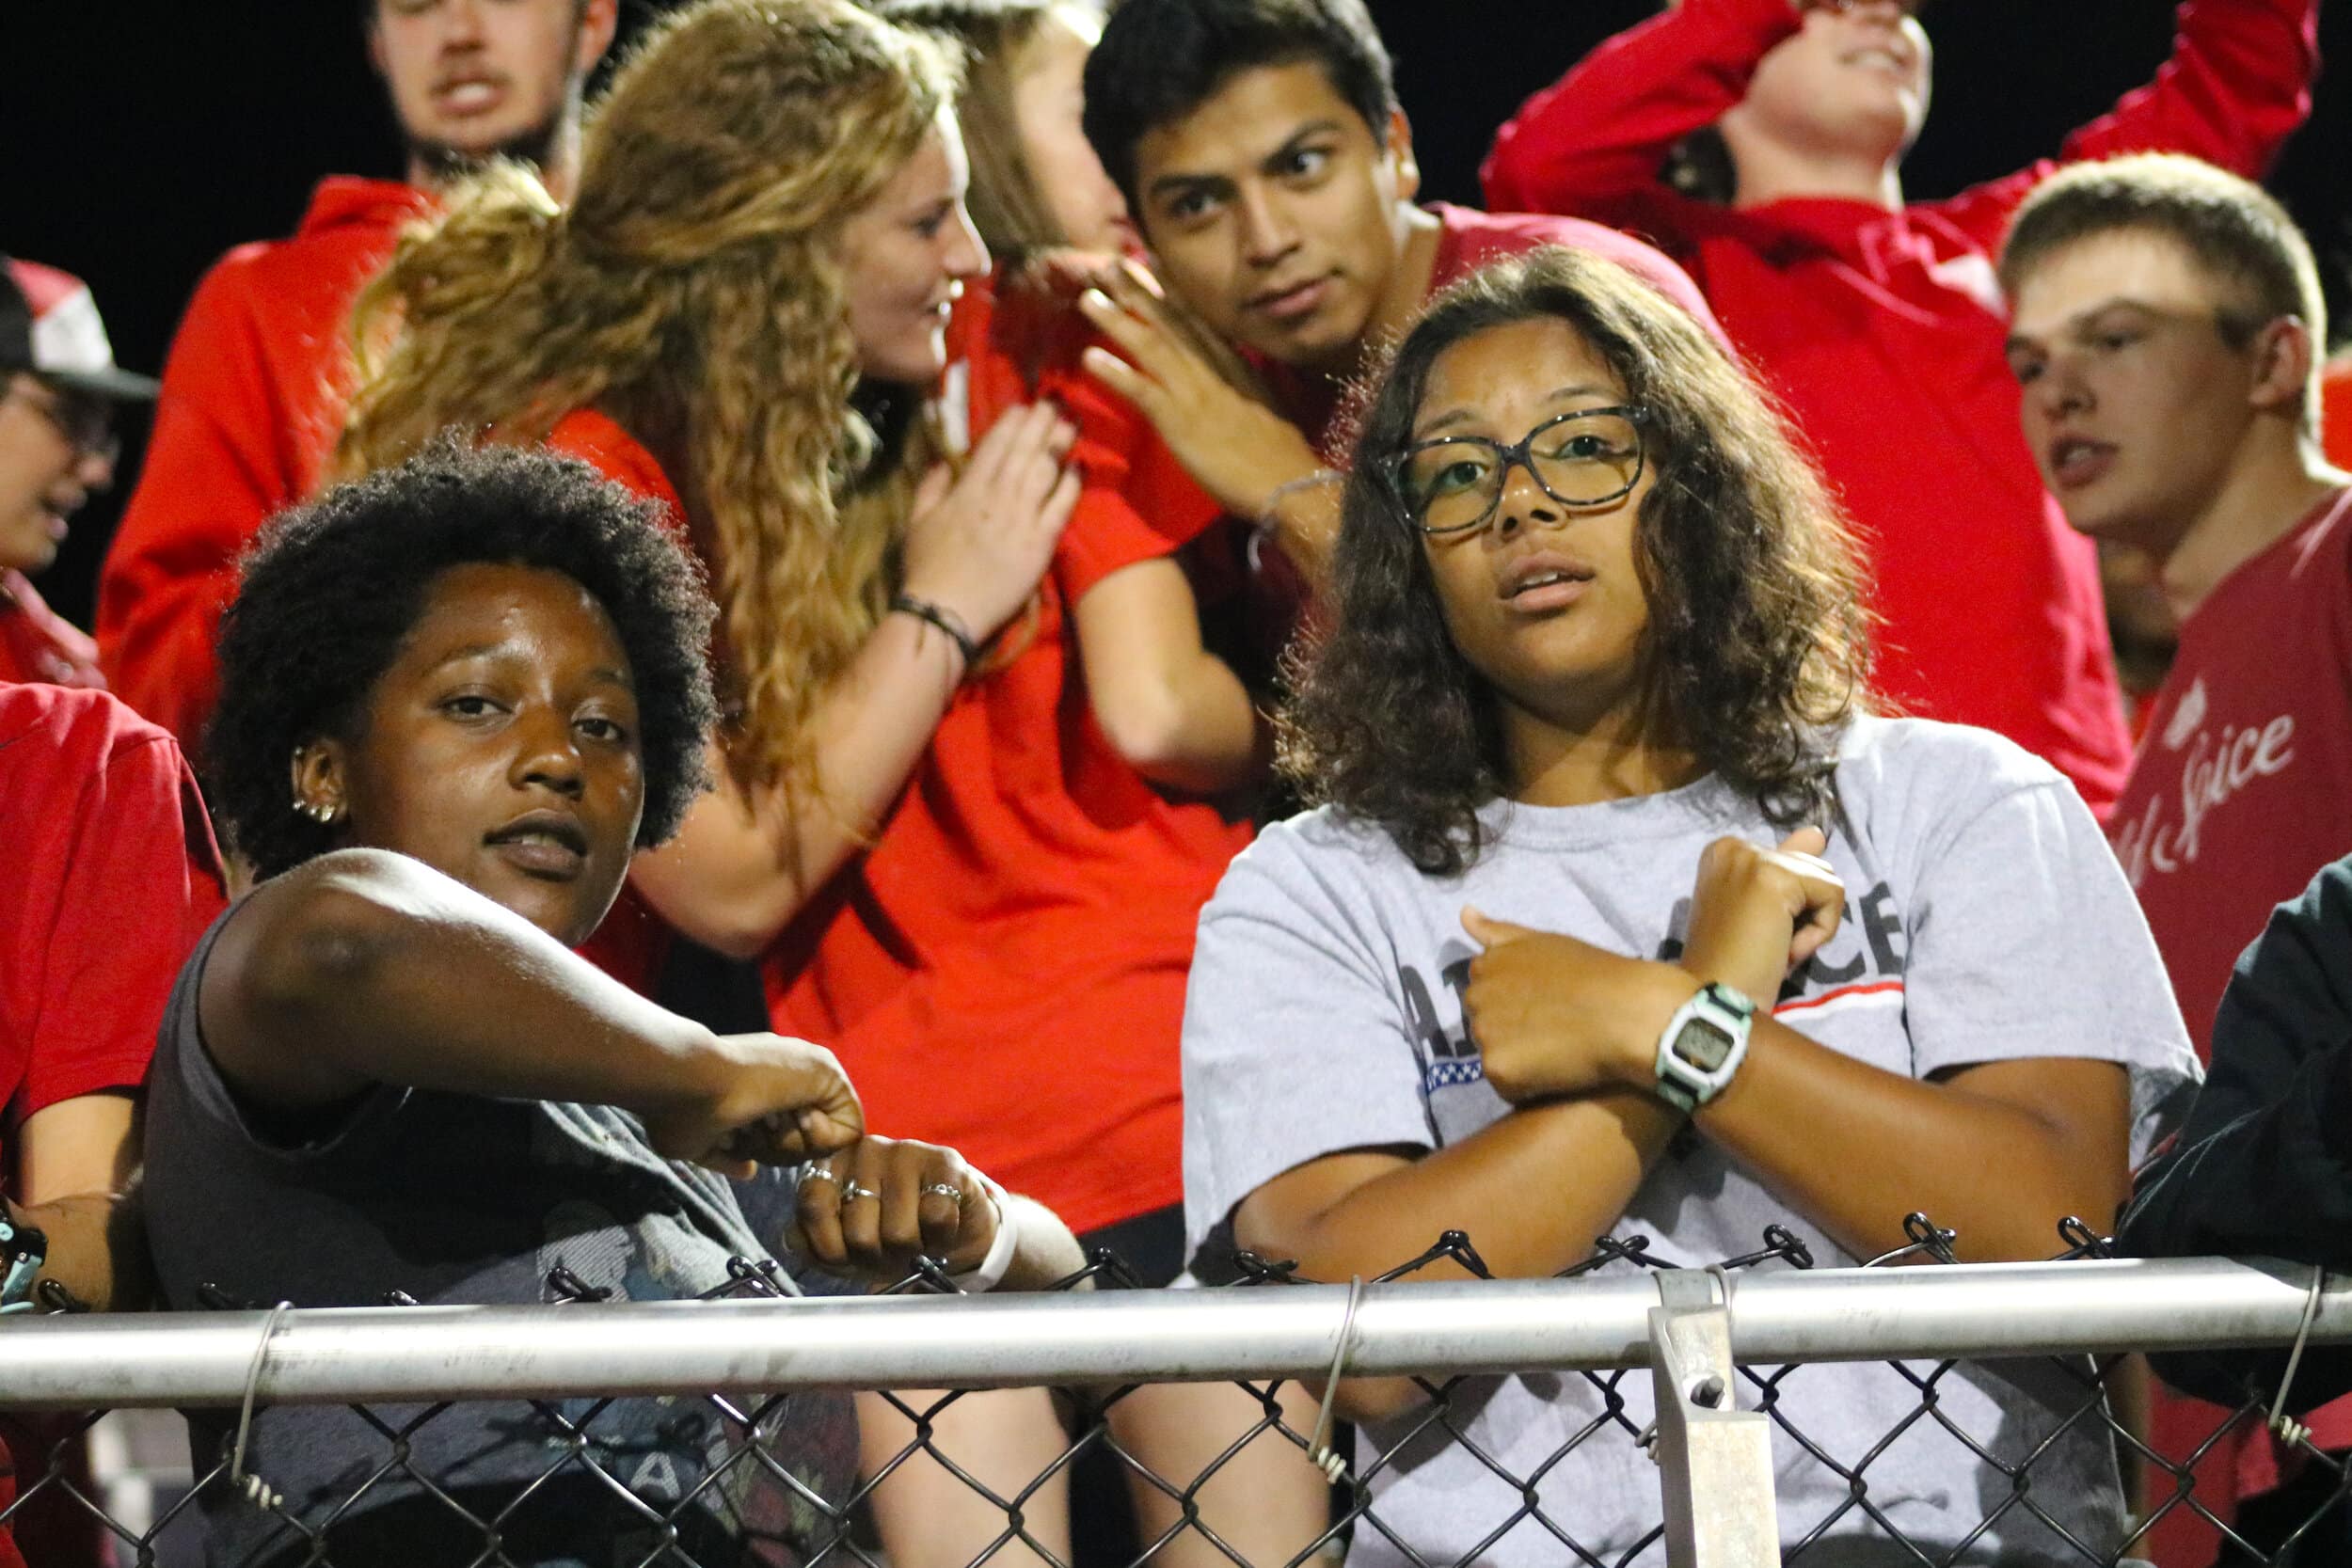 Sophomore Kira Hearns and sophomore Marley Quigley-Jones dance in the student section while the DJ plays music after a play.